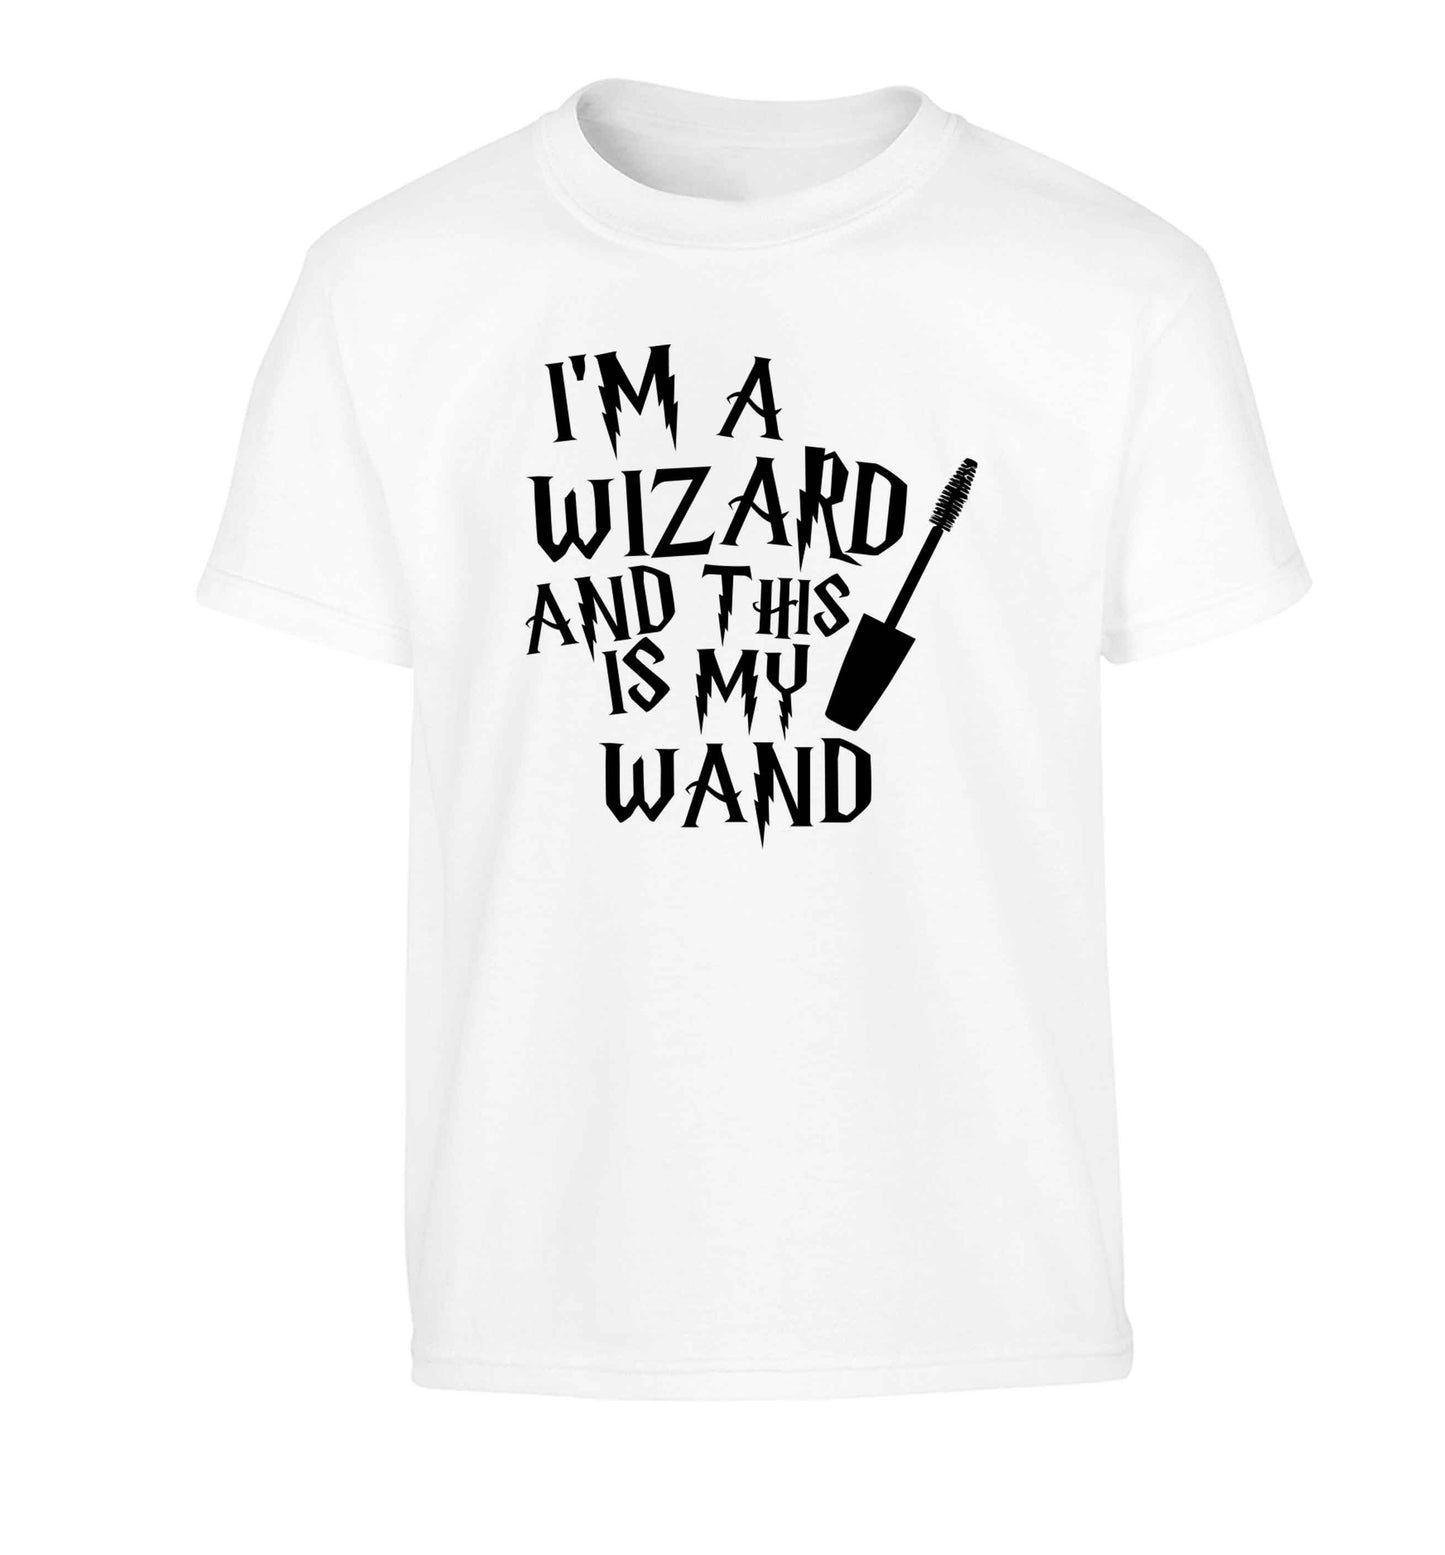 I'm a wizard and this is my wand Children's white Tshirt 12-13 Years